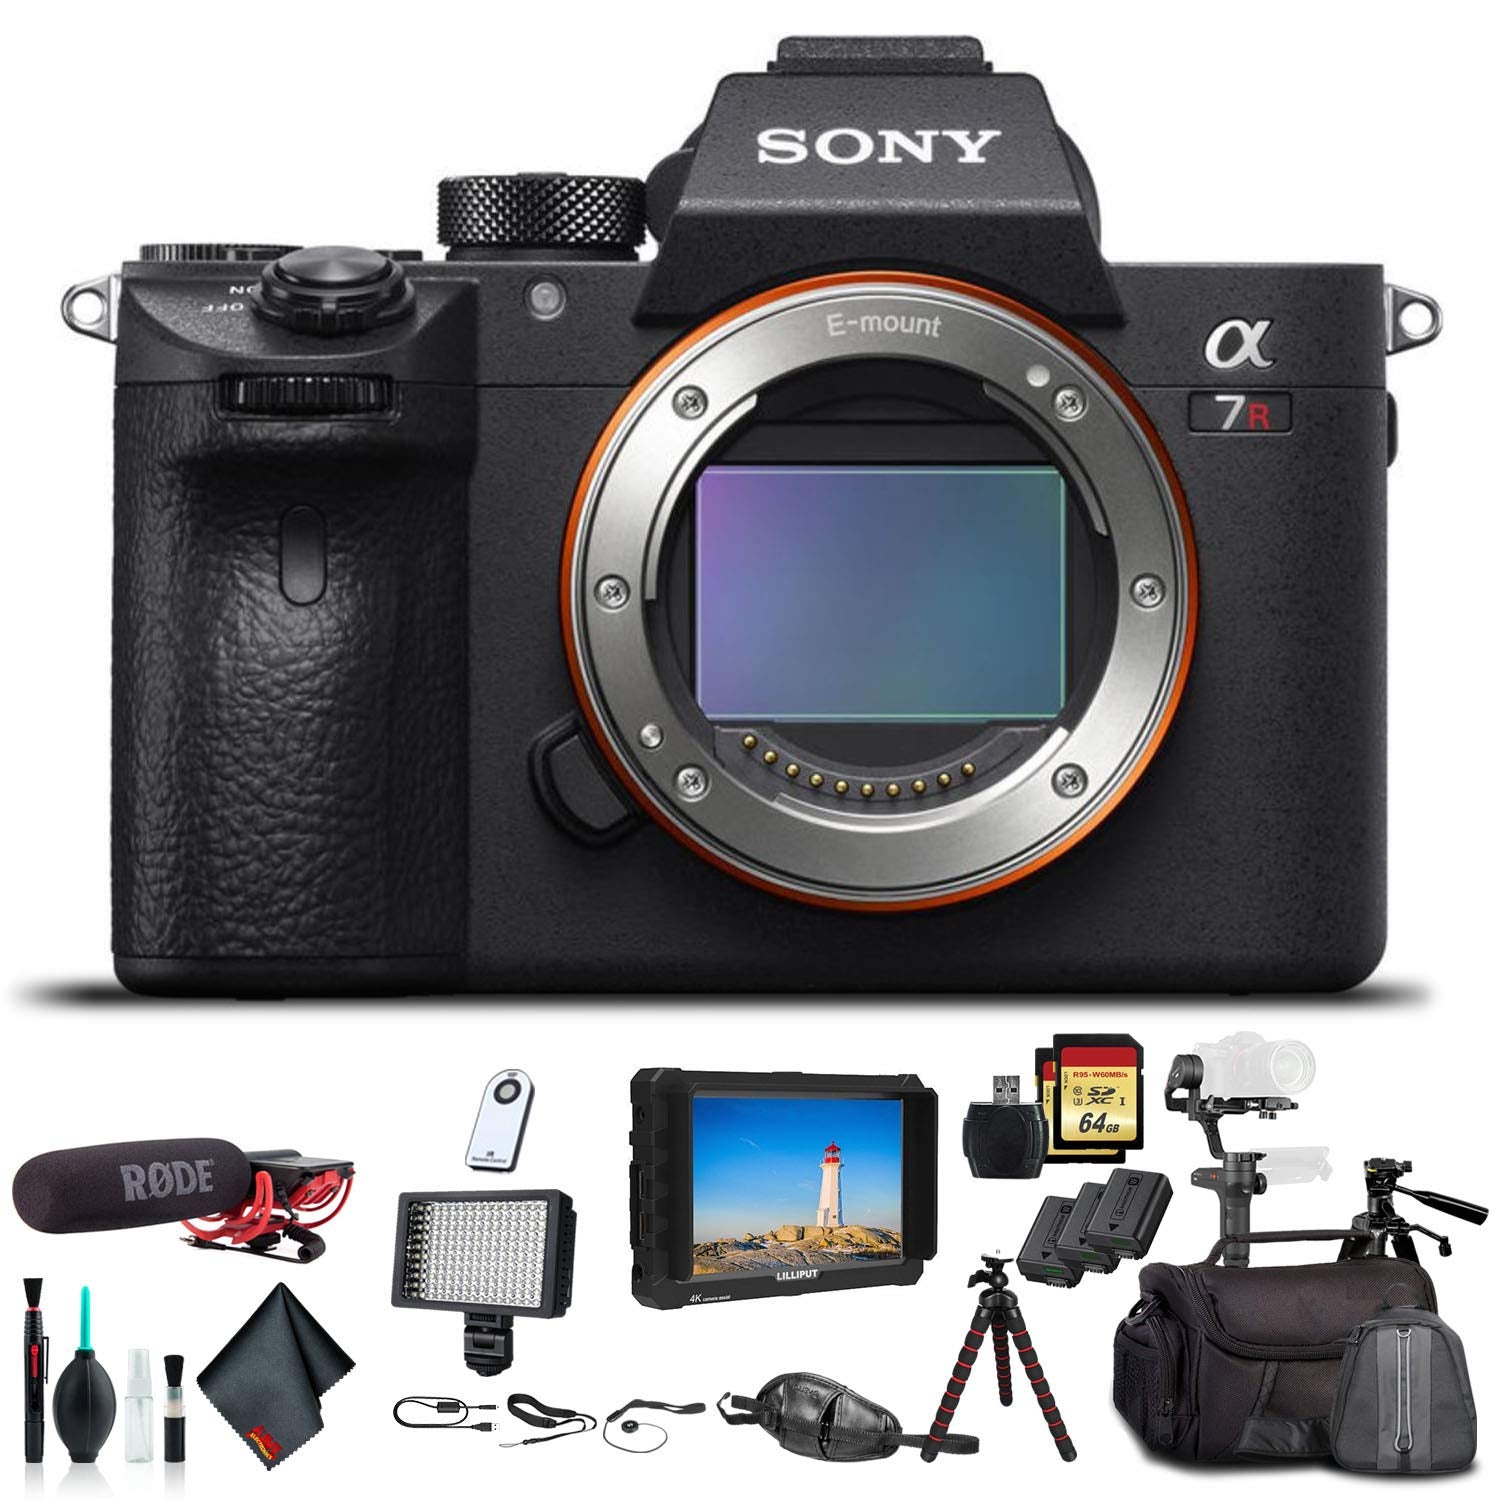 Sony Alpha a7R III Mirrorless Camera ILCE7RM3/B With Soft Bag, Zhiyun-Tech WEEBILL Stabilizer, 2x Extra Batteries, Rode Mic, LED Light, 2x 64GB Memory Cards, External Monitor , Essential Accessories